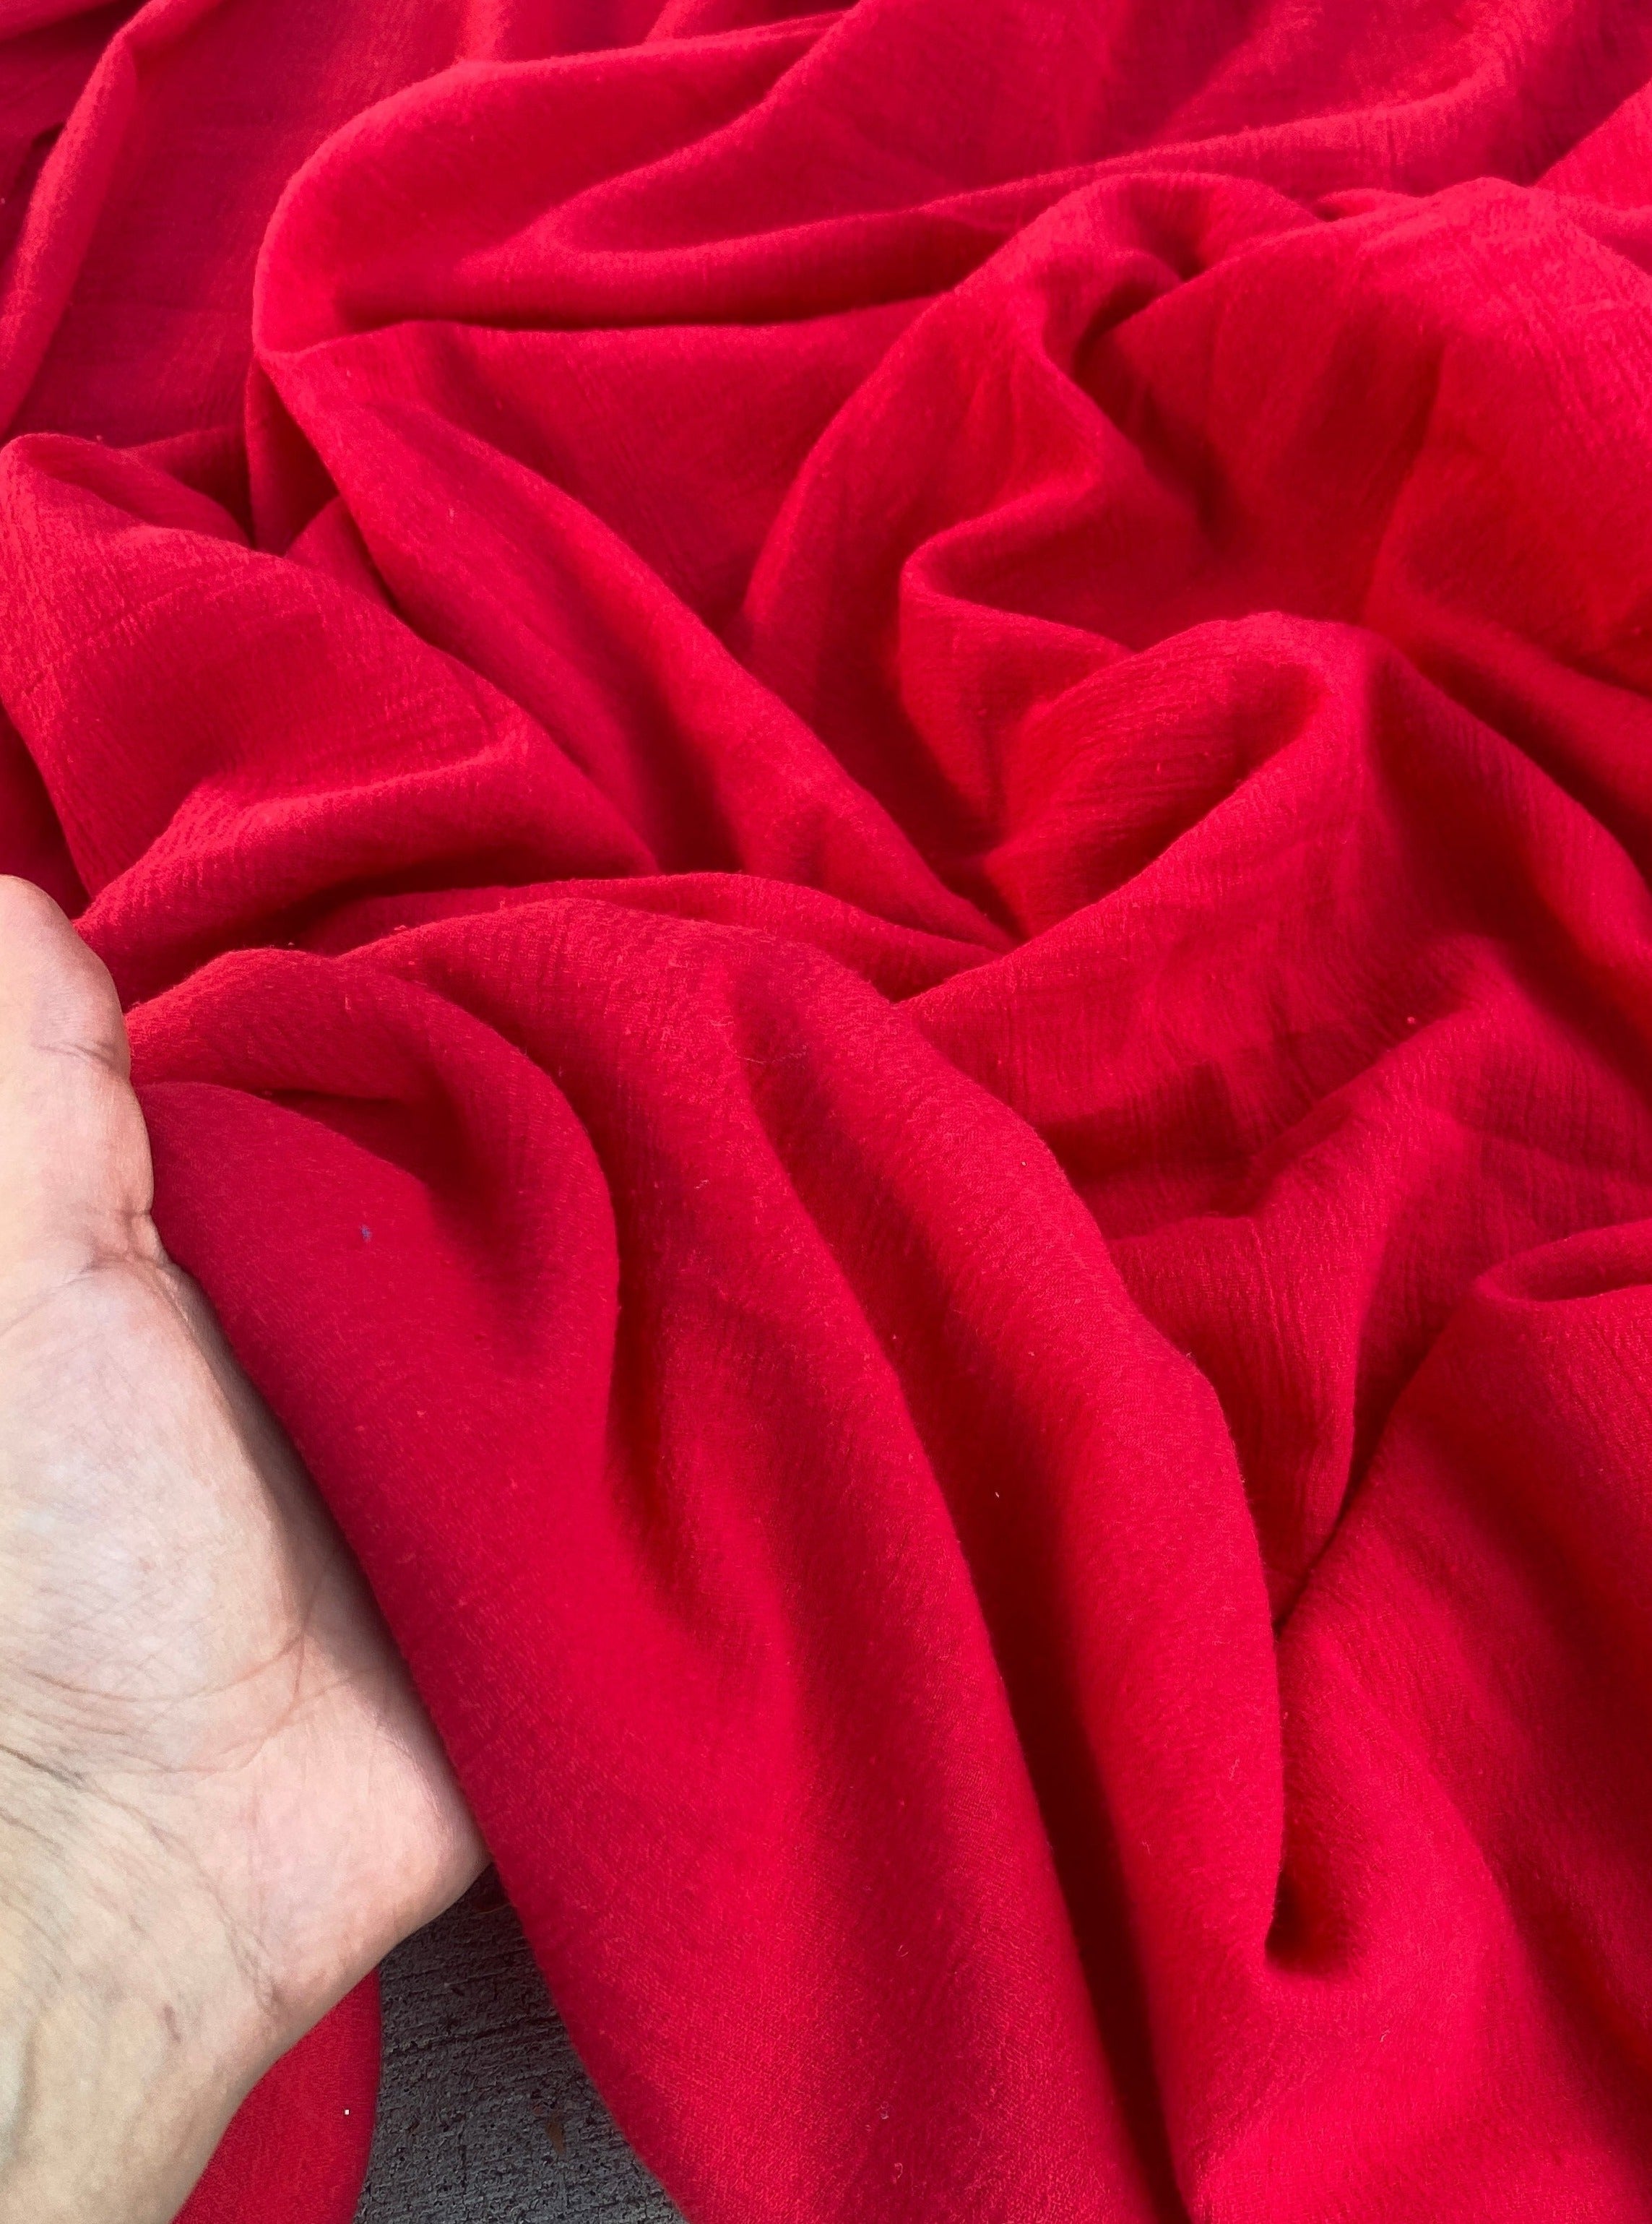 red gauze fabric, red cotton gauze fabric, red cotton fabric, red crinkle gauze. red textured gauze fabric, fabric for swaddles fabric for baby, baby fabric red, red natural fabric